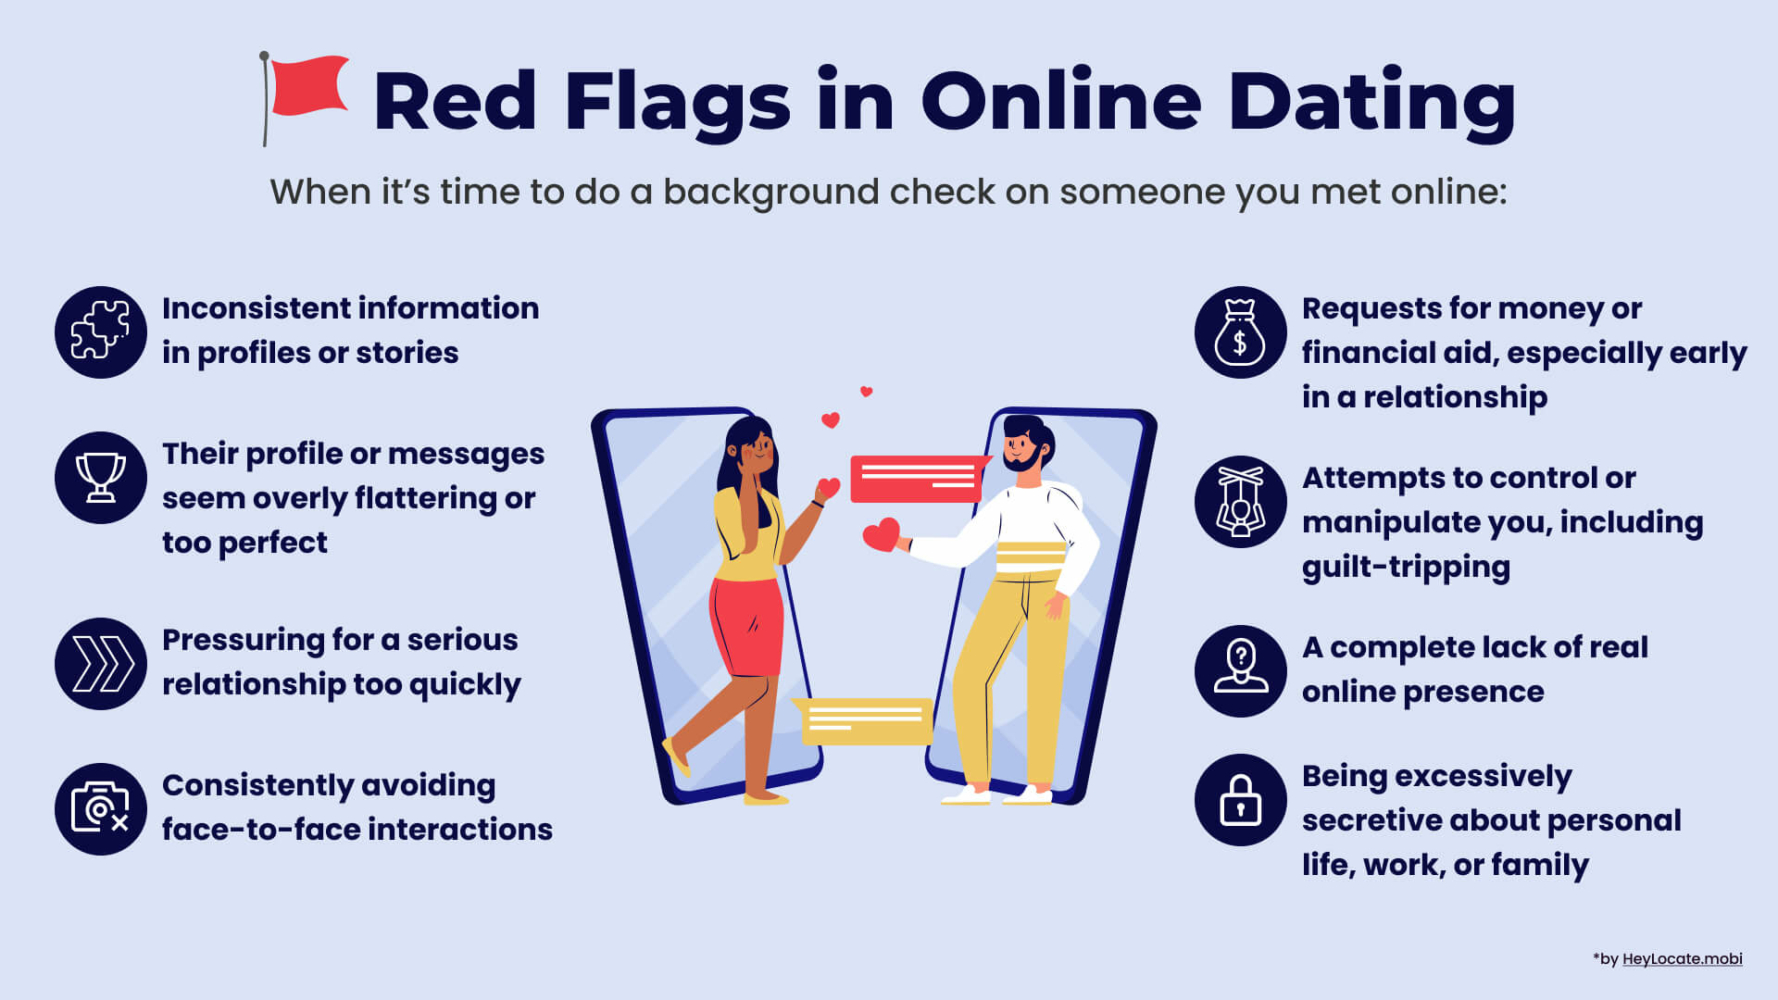 List of signs when it's time to do a background check in online dating showed on HeyLocate.mobi infographic